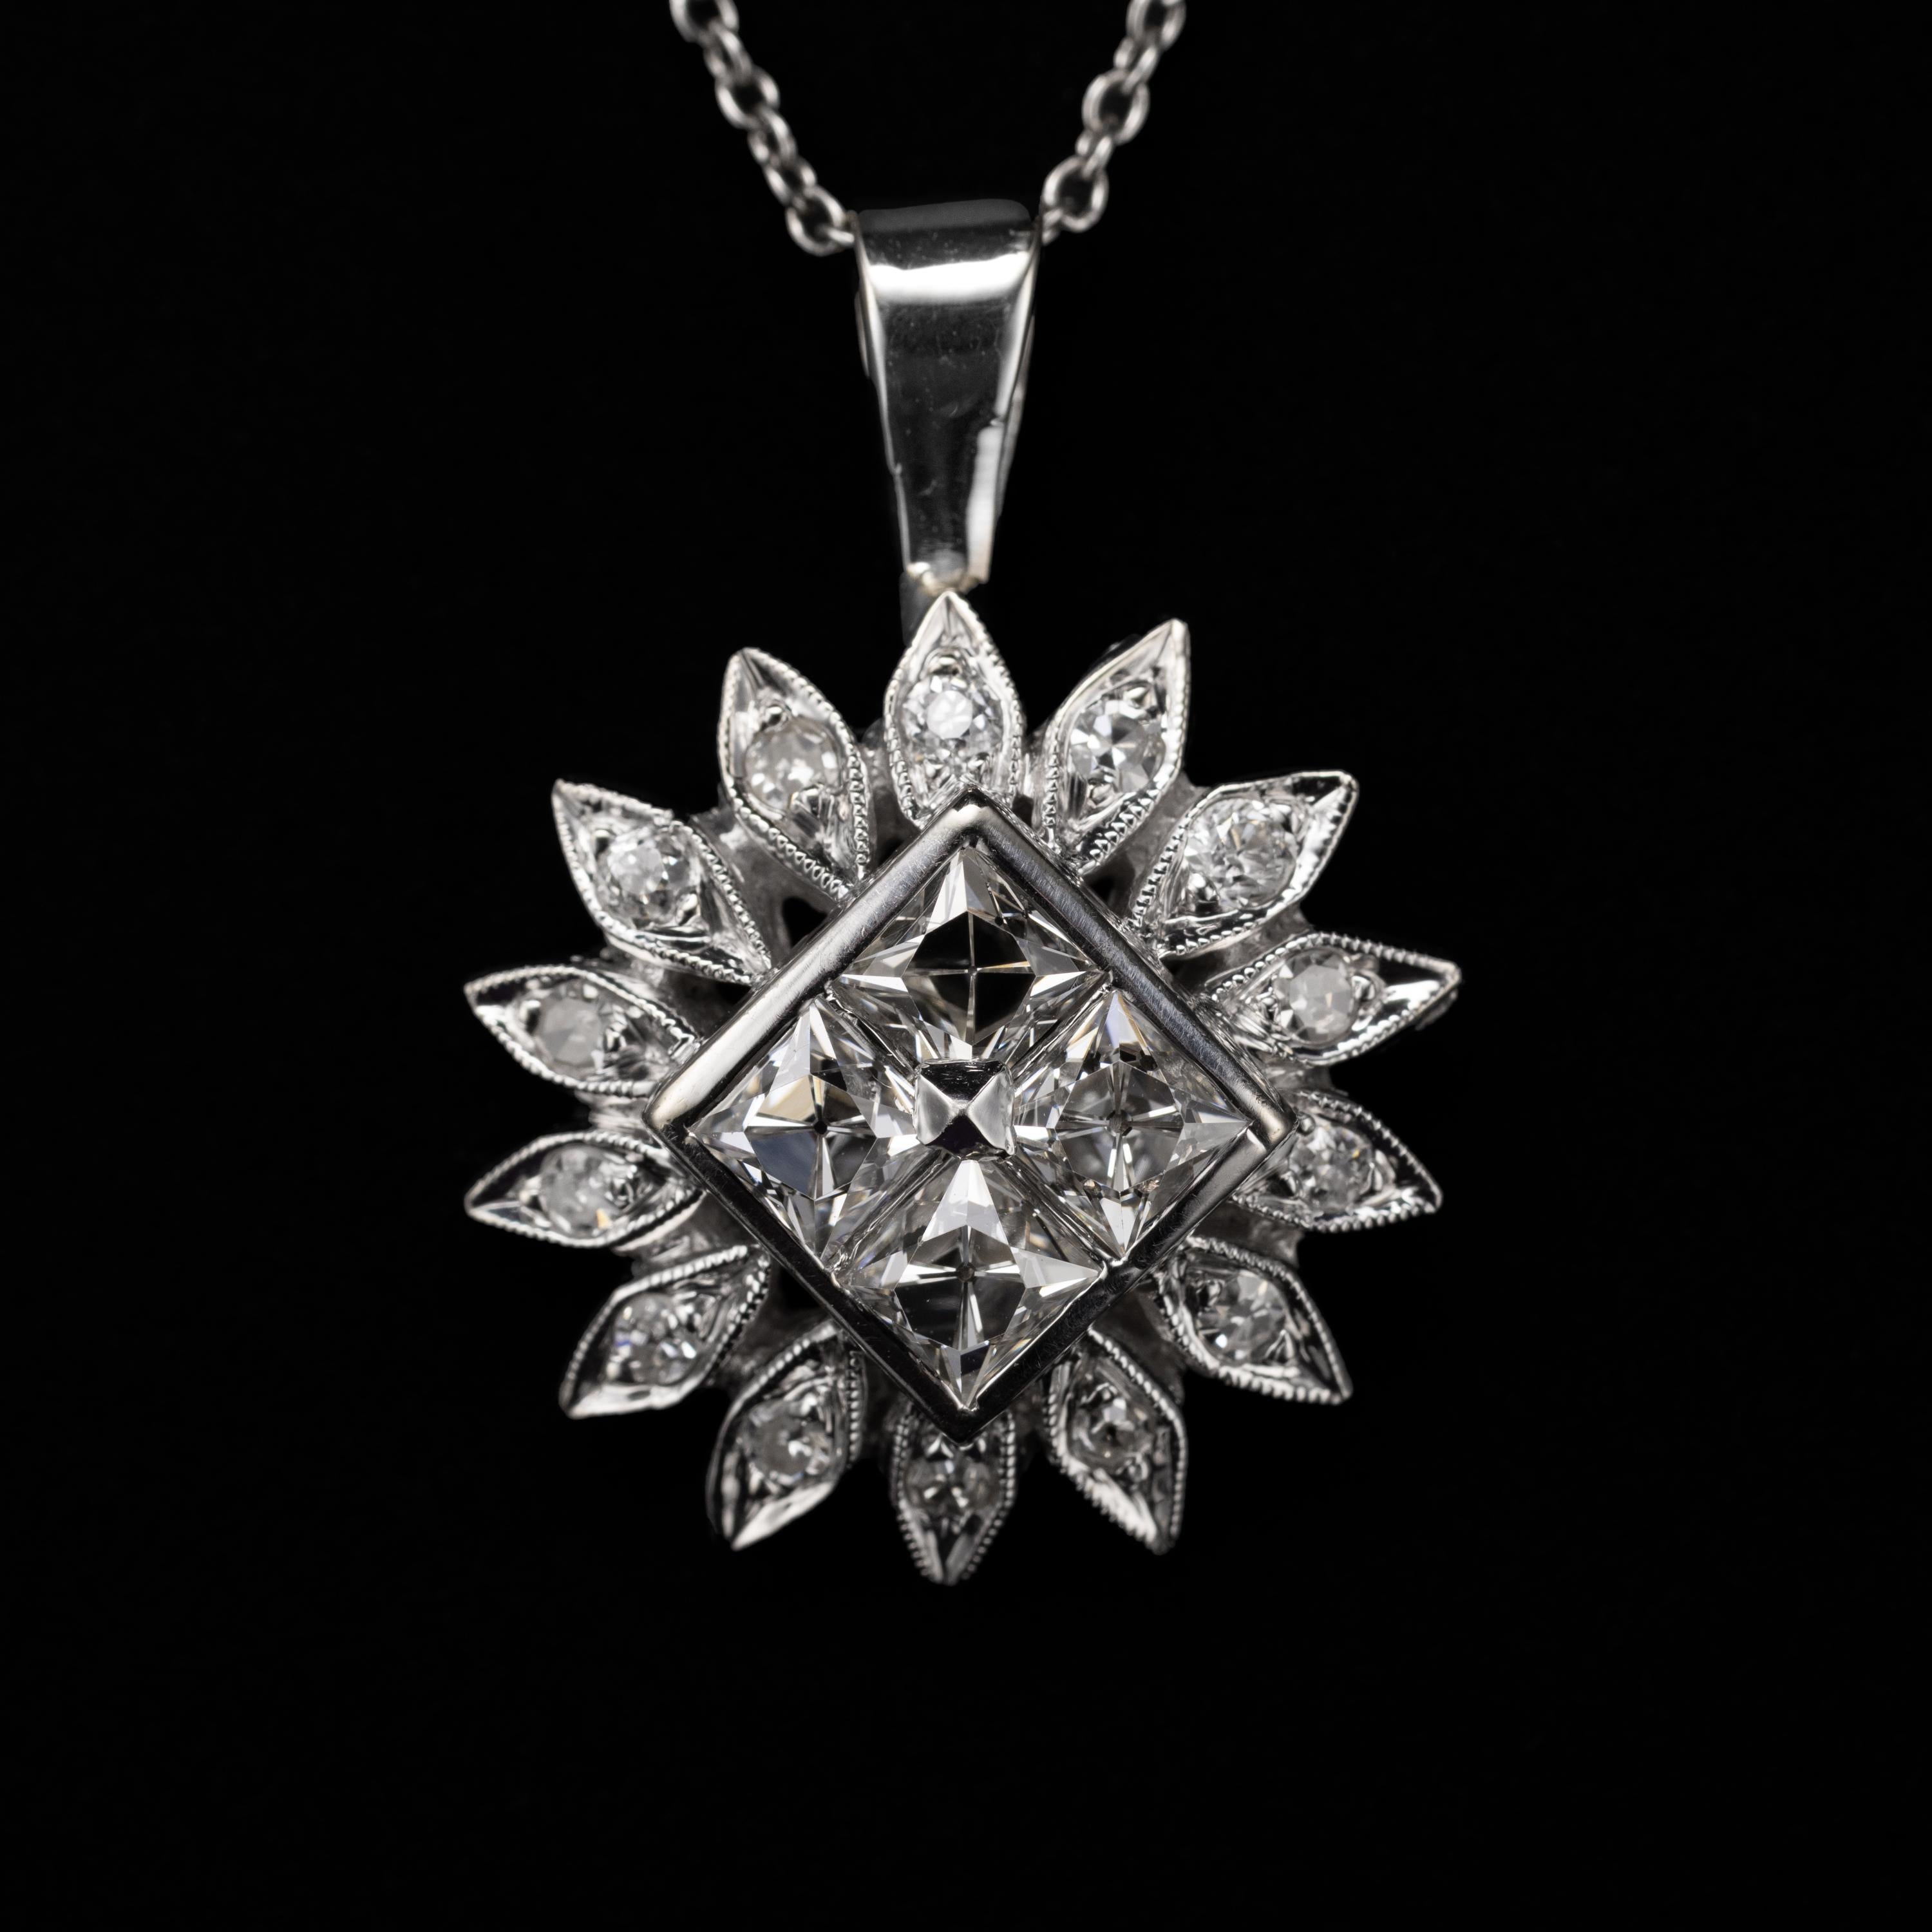 This is a stunning and uncommon pendant featuring four French-cut diamonds set in a central frame aligned on the bias and surrounded by 